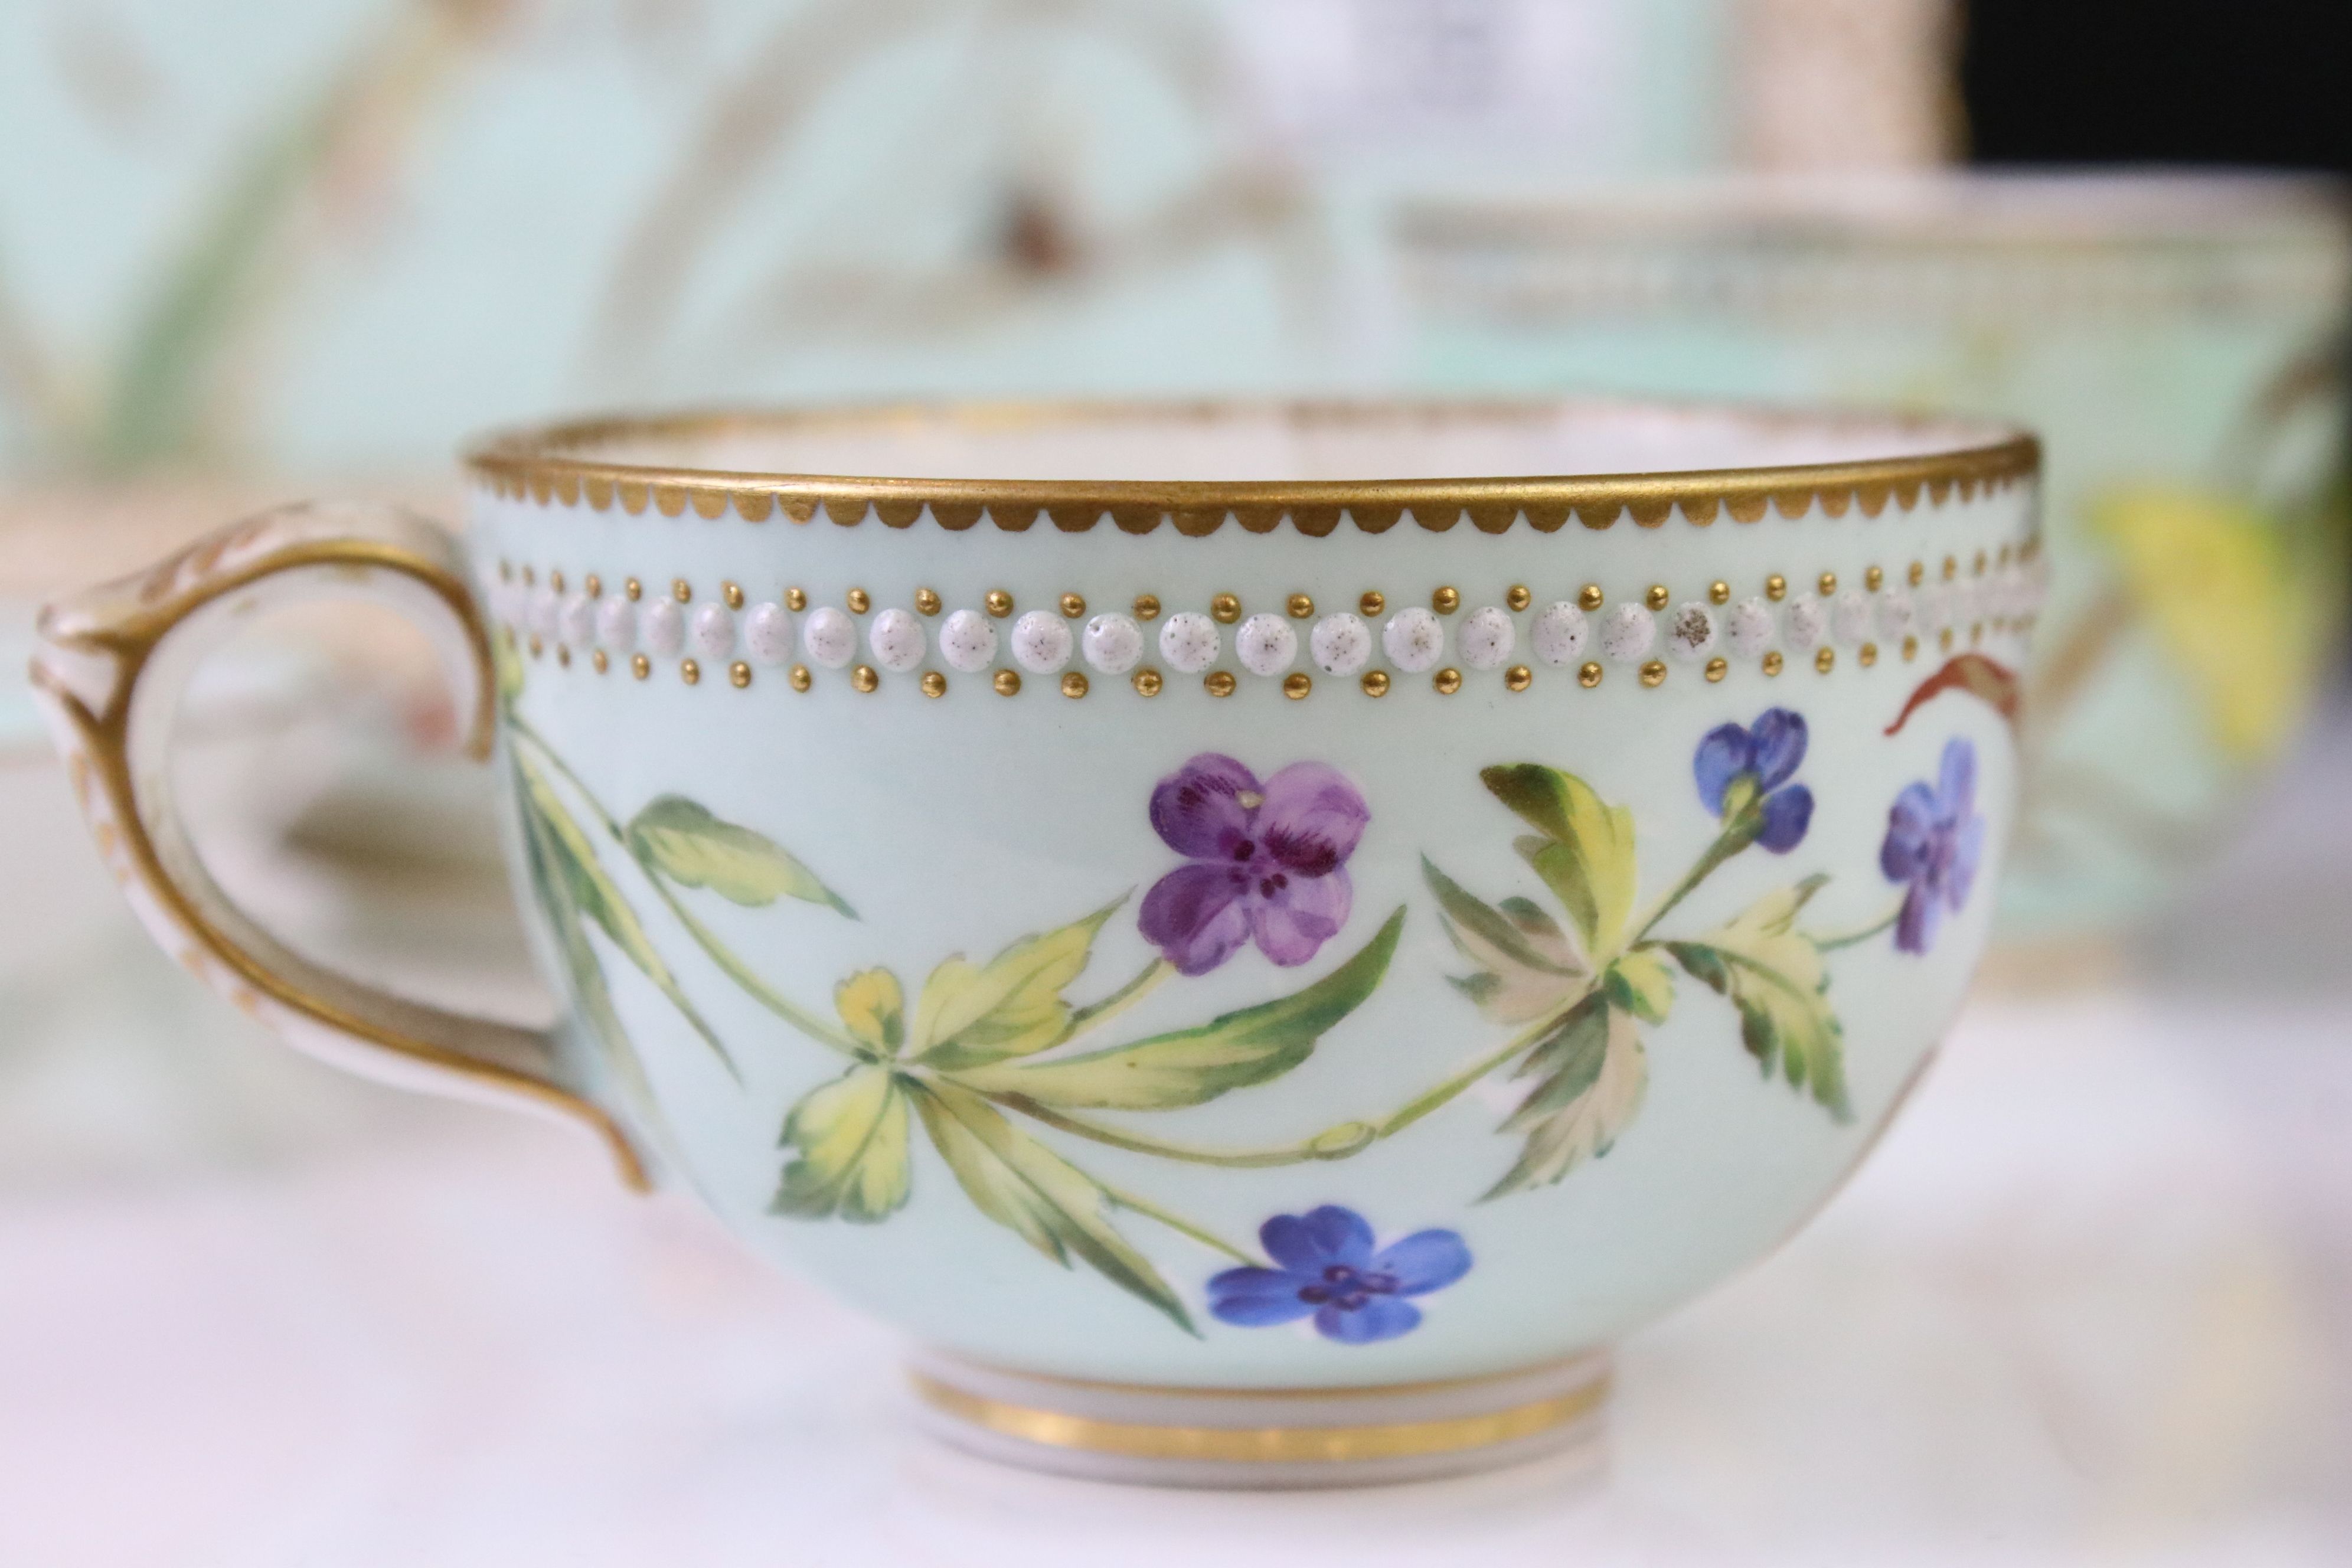 Royal Worcester porcelain cabaret tea set with hand painted butterfly, floral and foliate - Image 17 of 18